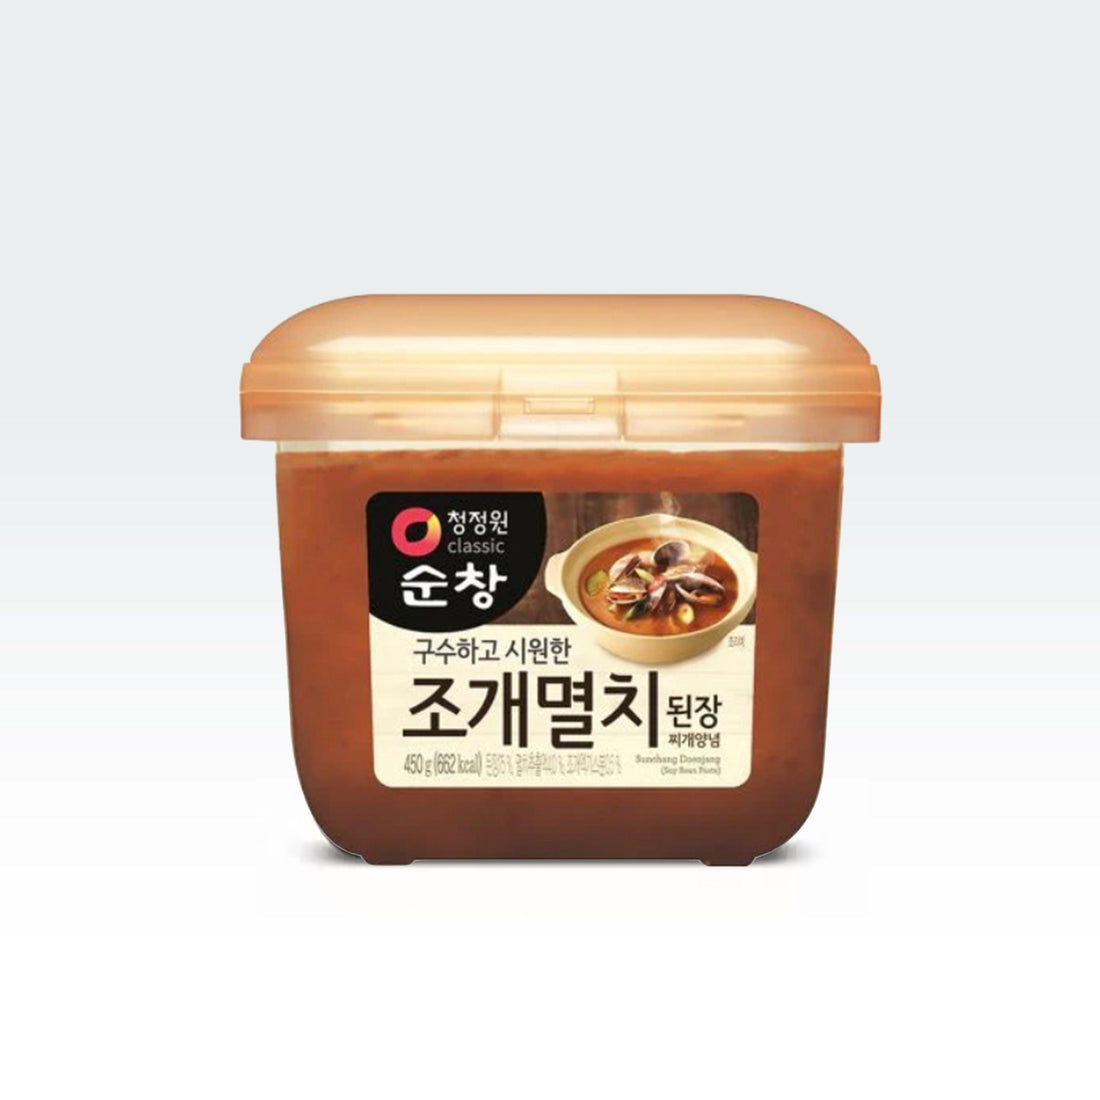 Chung Jung One SunChang Soybean Paste Shellfish Anchovy Flavor 15.9oz(450g) - Anytime Basket